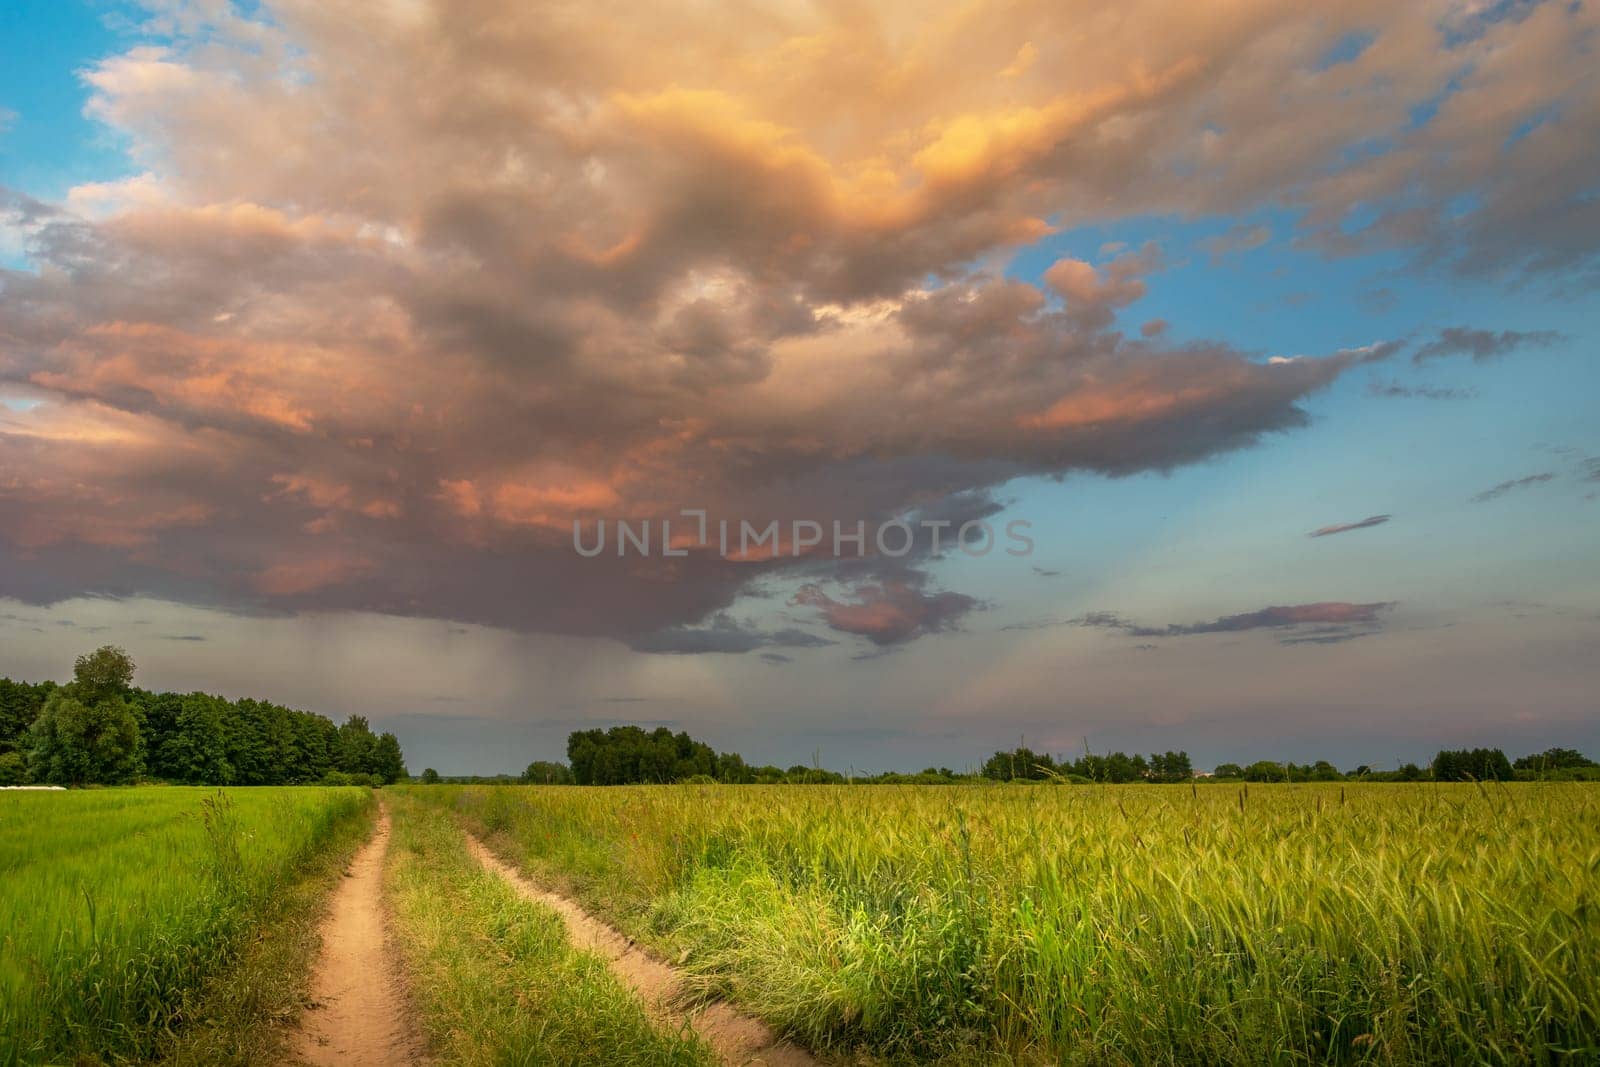 Dirt road next to a green field with grain and clouds highlighted at sunset